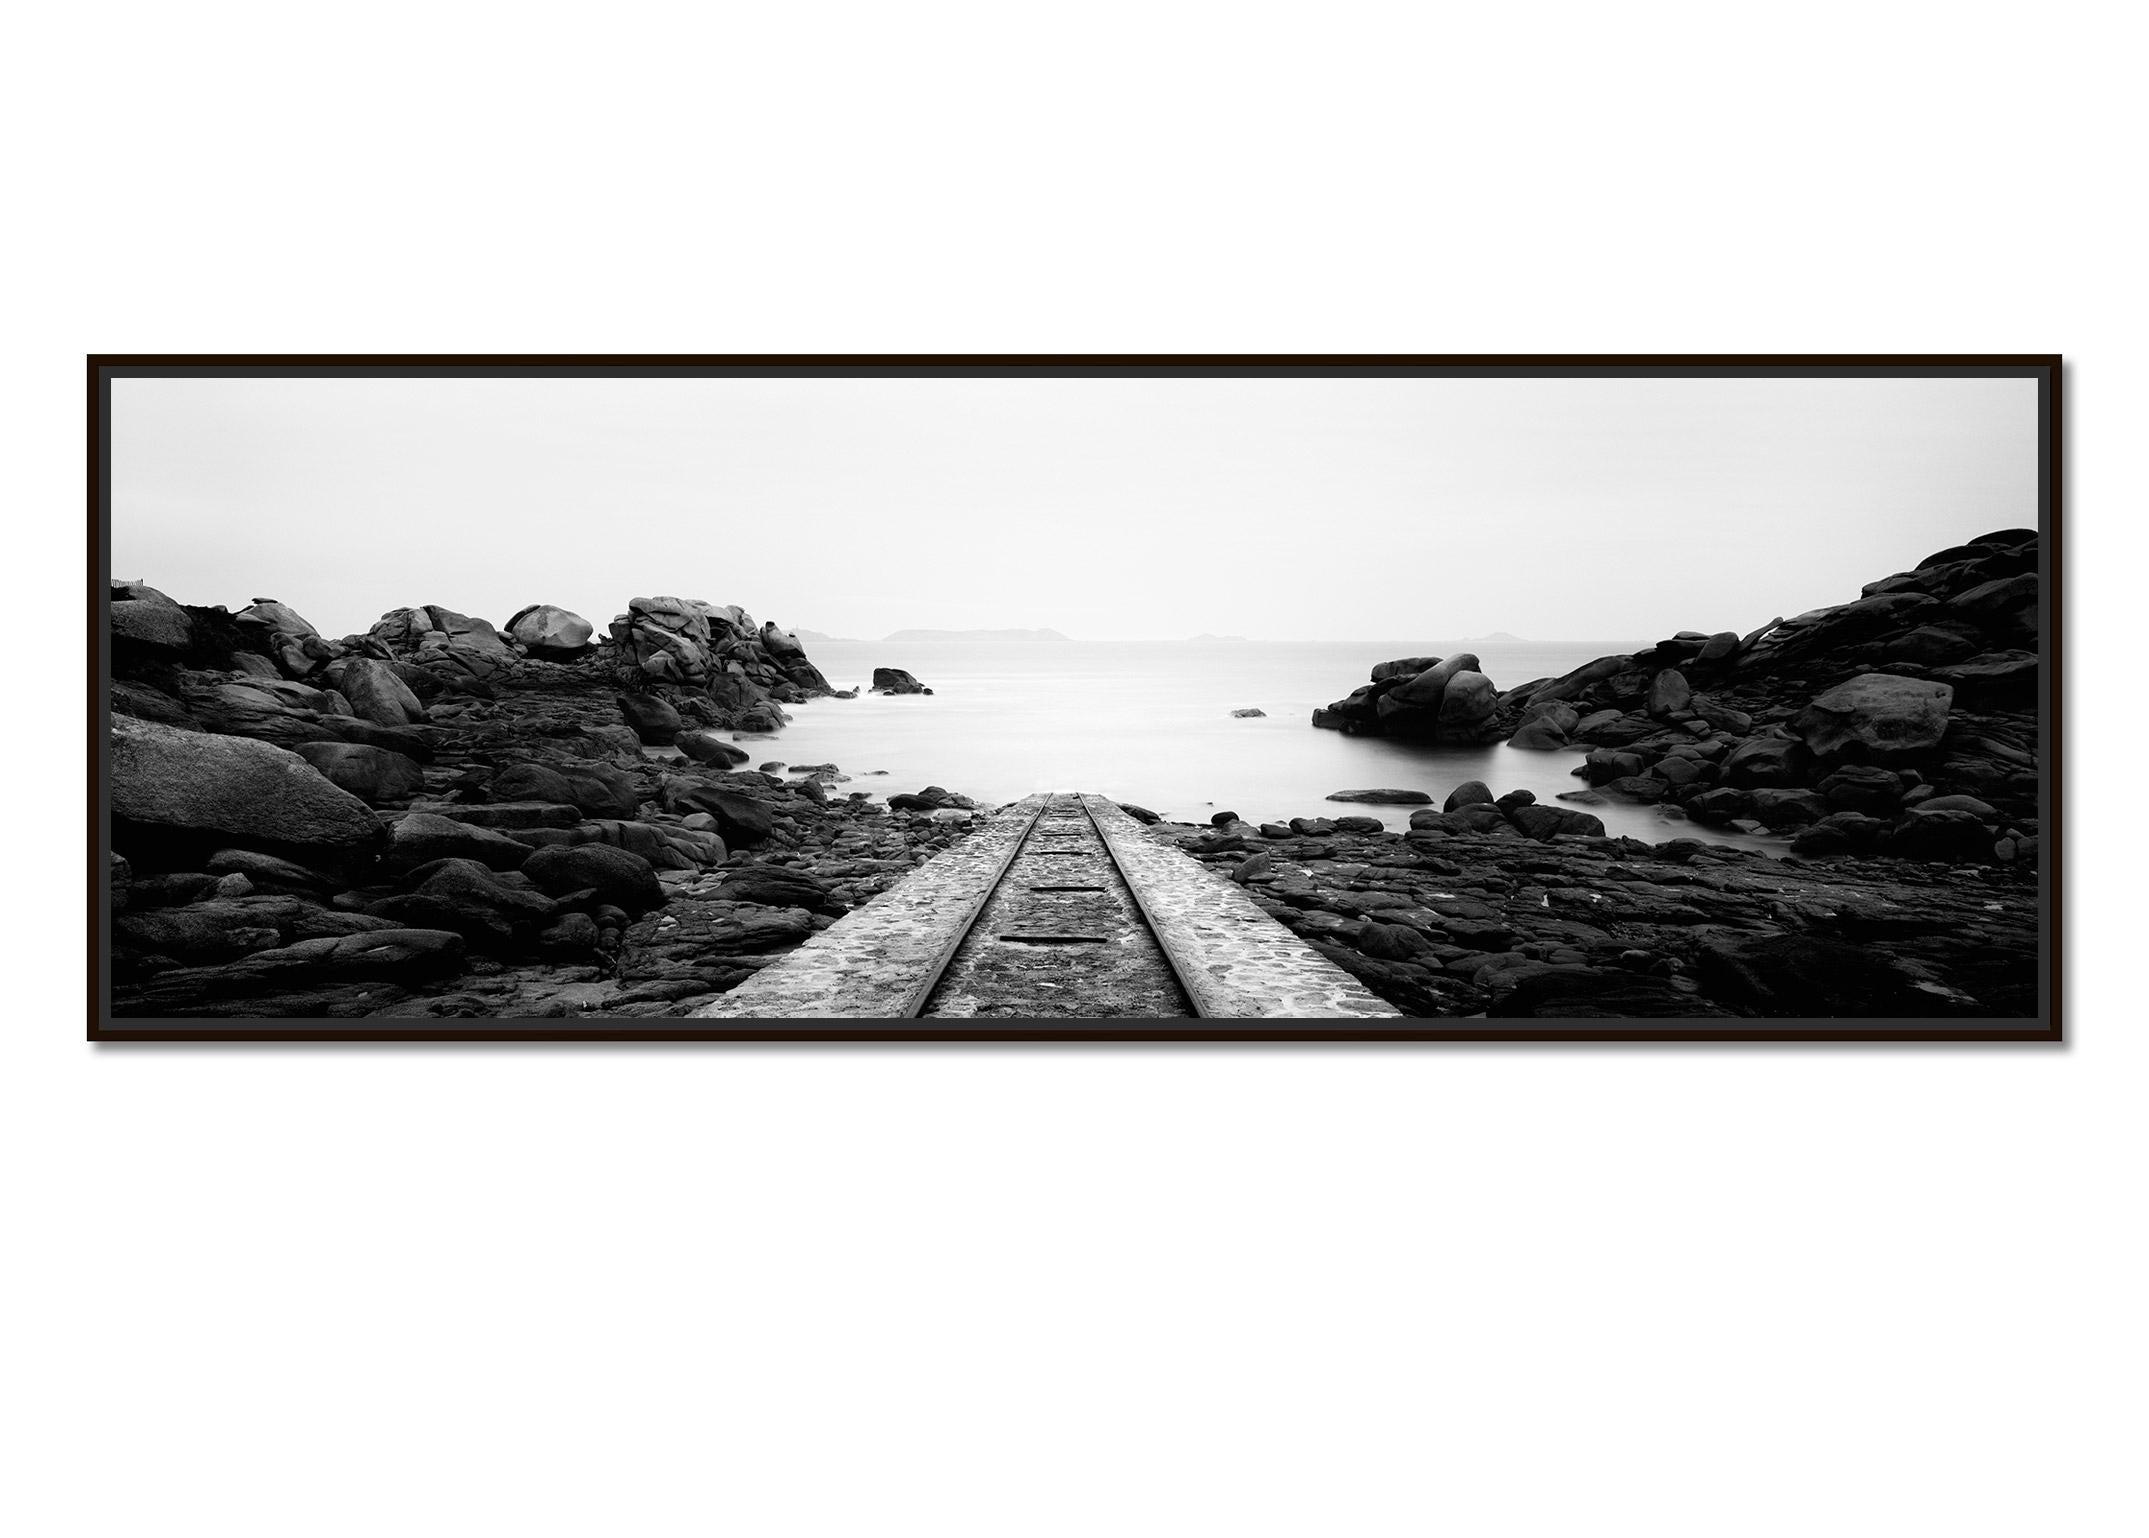 Into the Ocean railroad Atlantic bay France black white landscape photography - Photograph by Gerald Berghammer